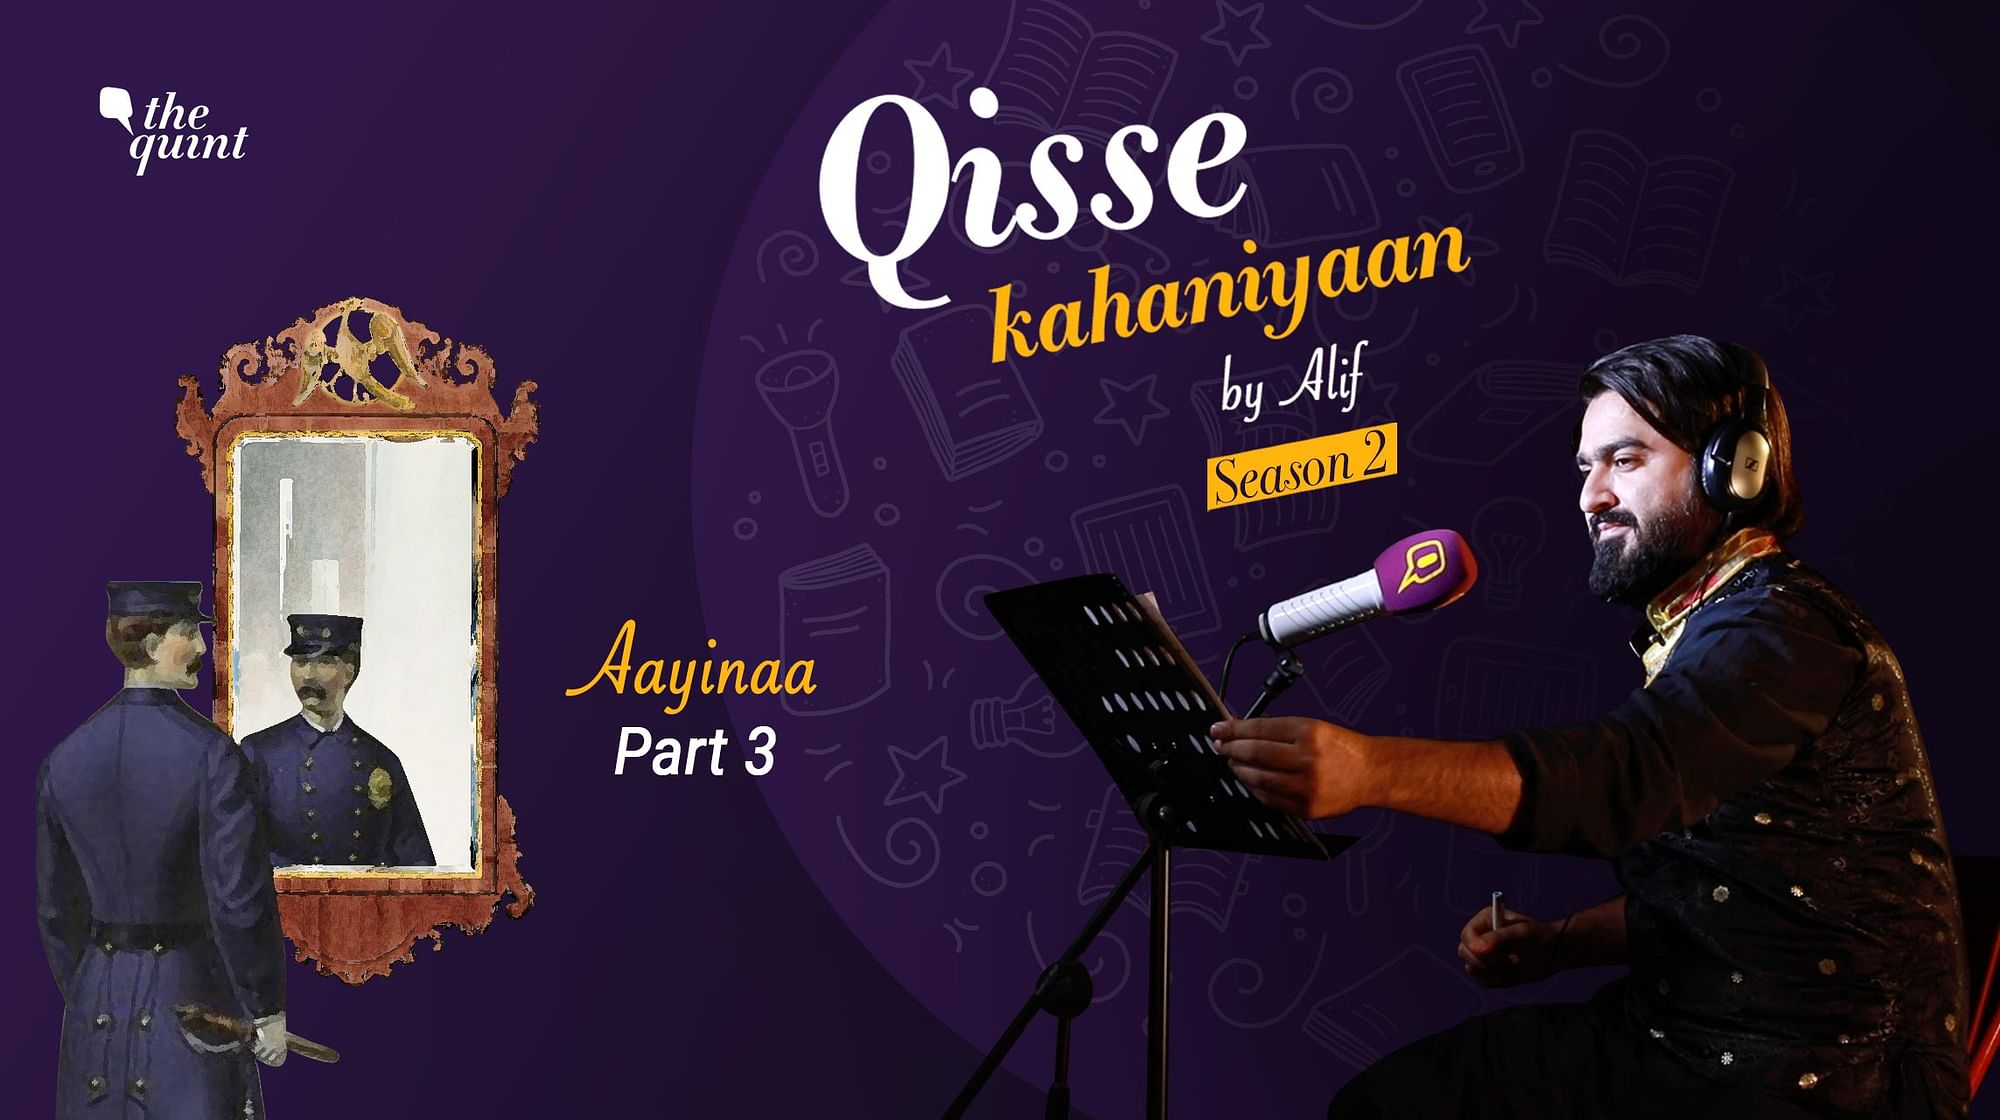 <div class="paragraphs"><p>Tune in to the final episode of Qisse Kahaniyaan Season 2.</p></div>